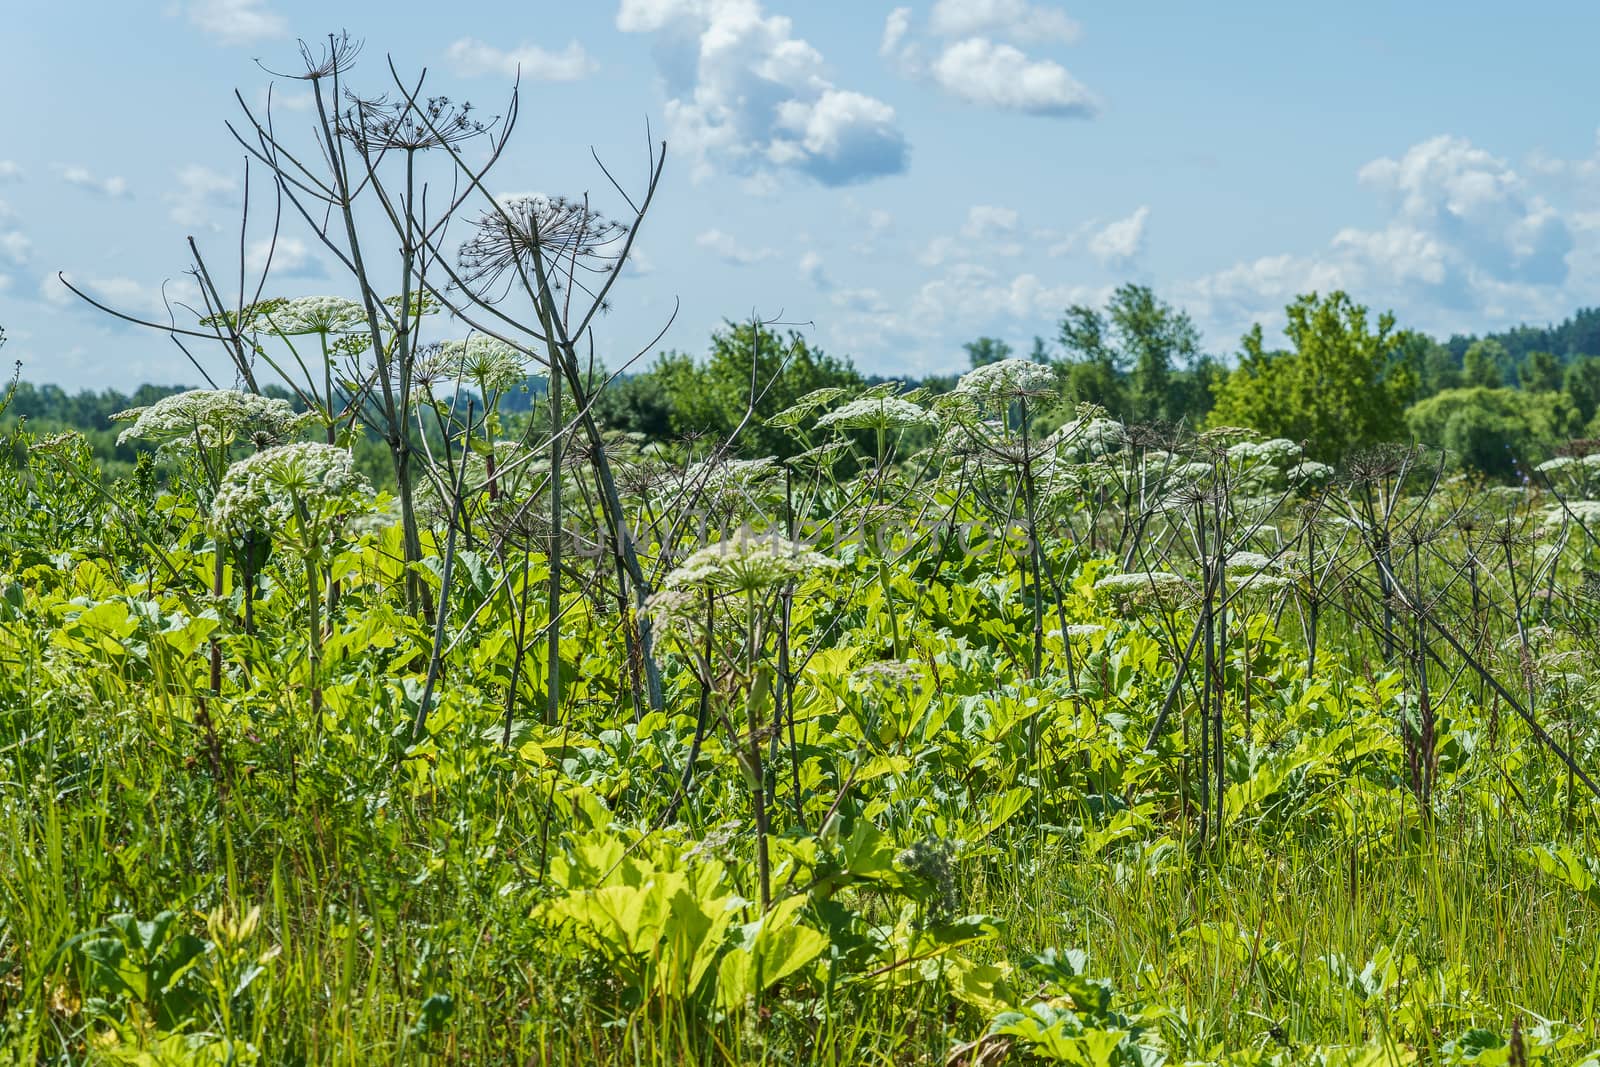 hogweed in a field, flowering specimens and several dried stalks by VADIM